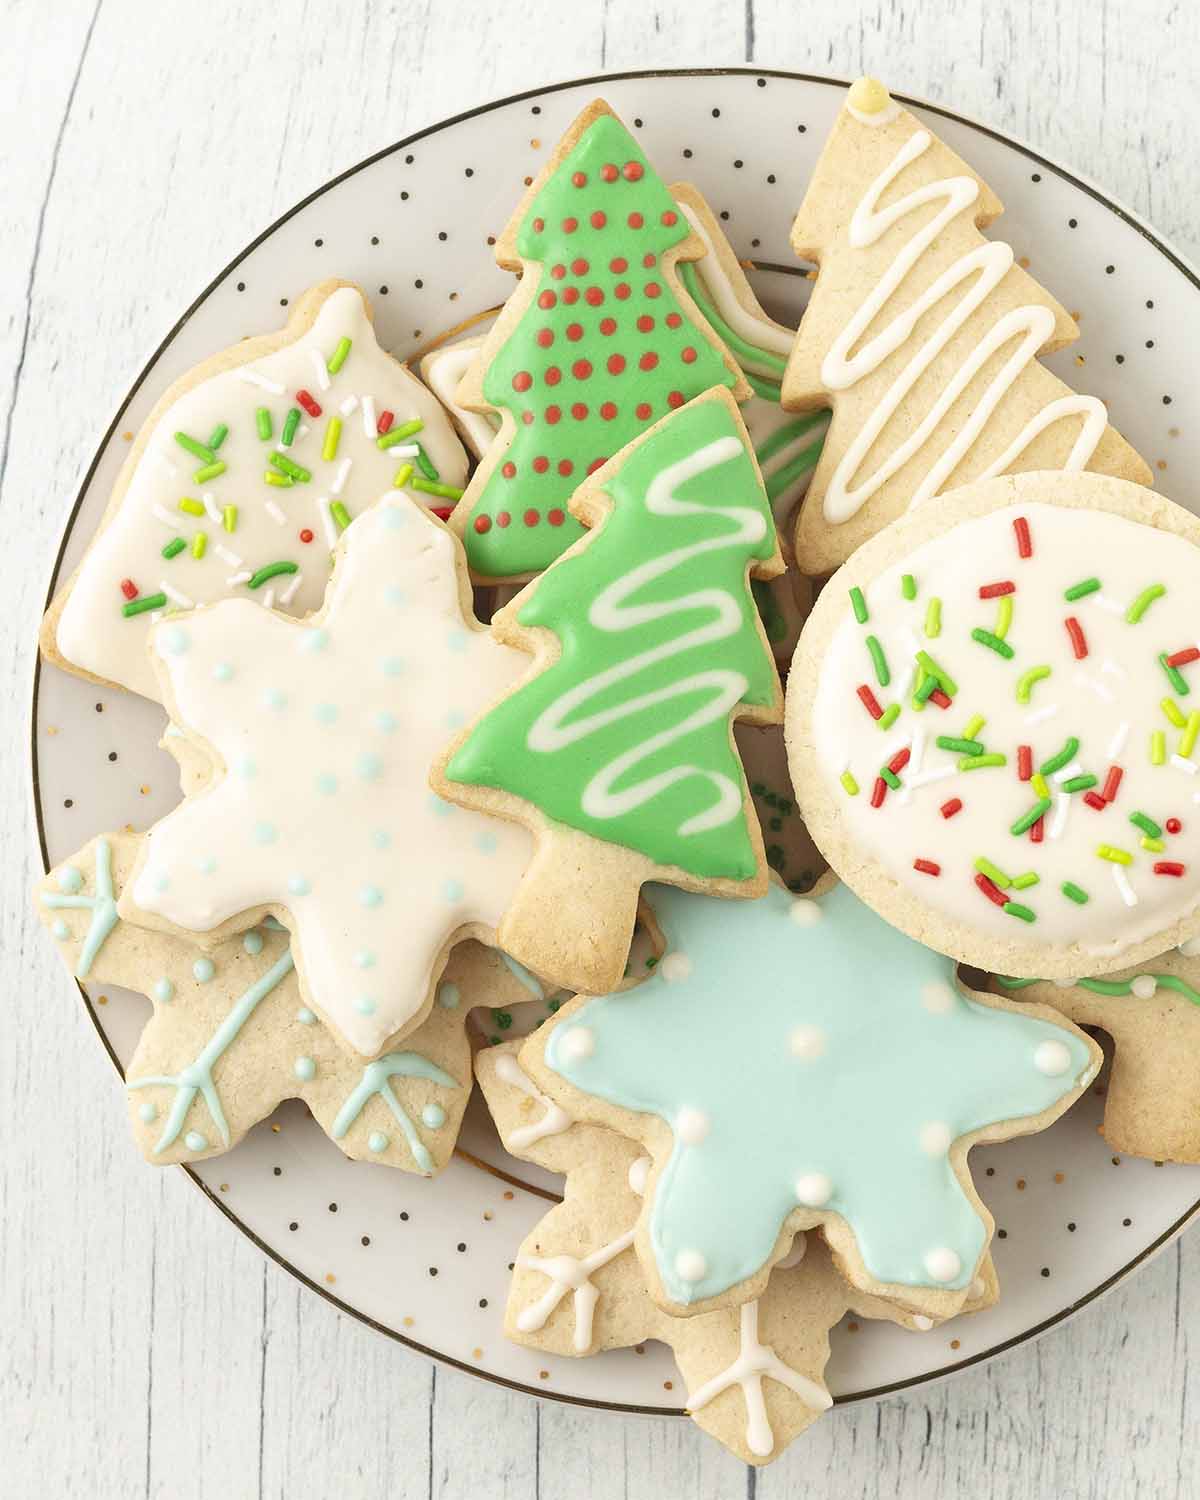 A plate of pretty Christmas cookies that have been decorated with aquafaba royal icing.